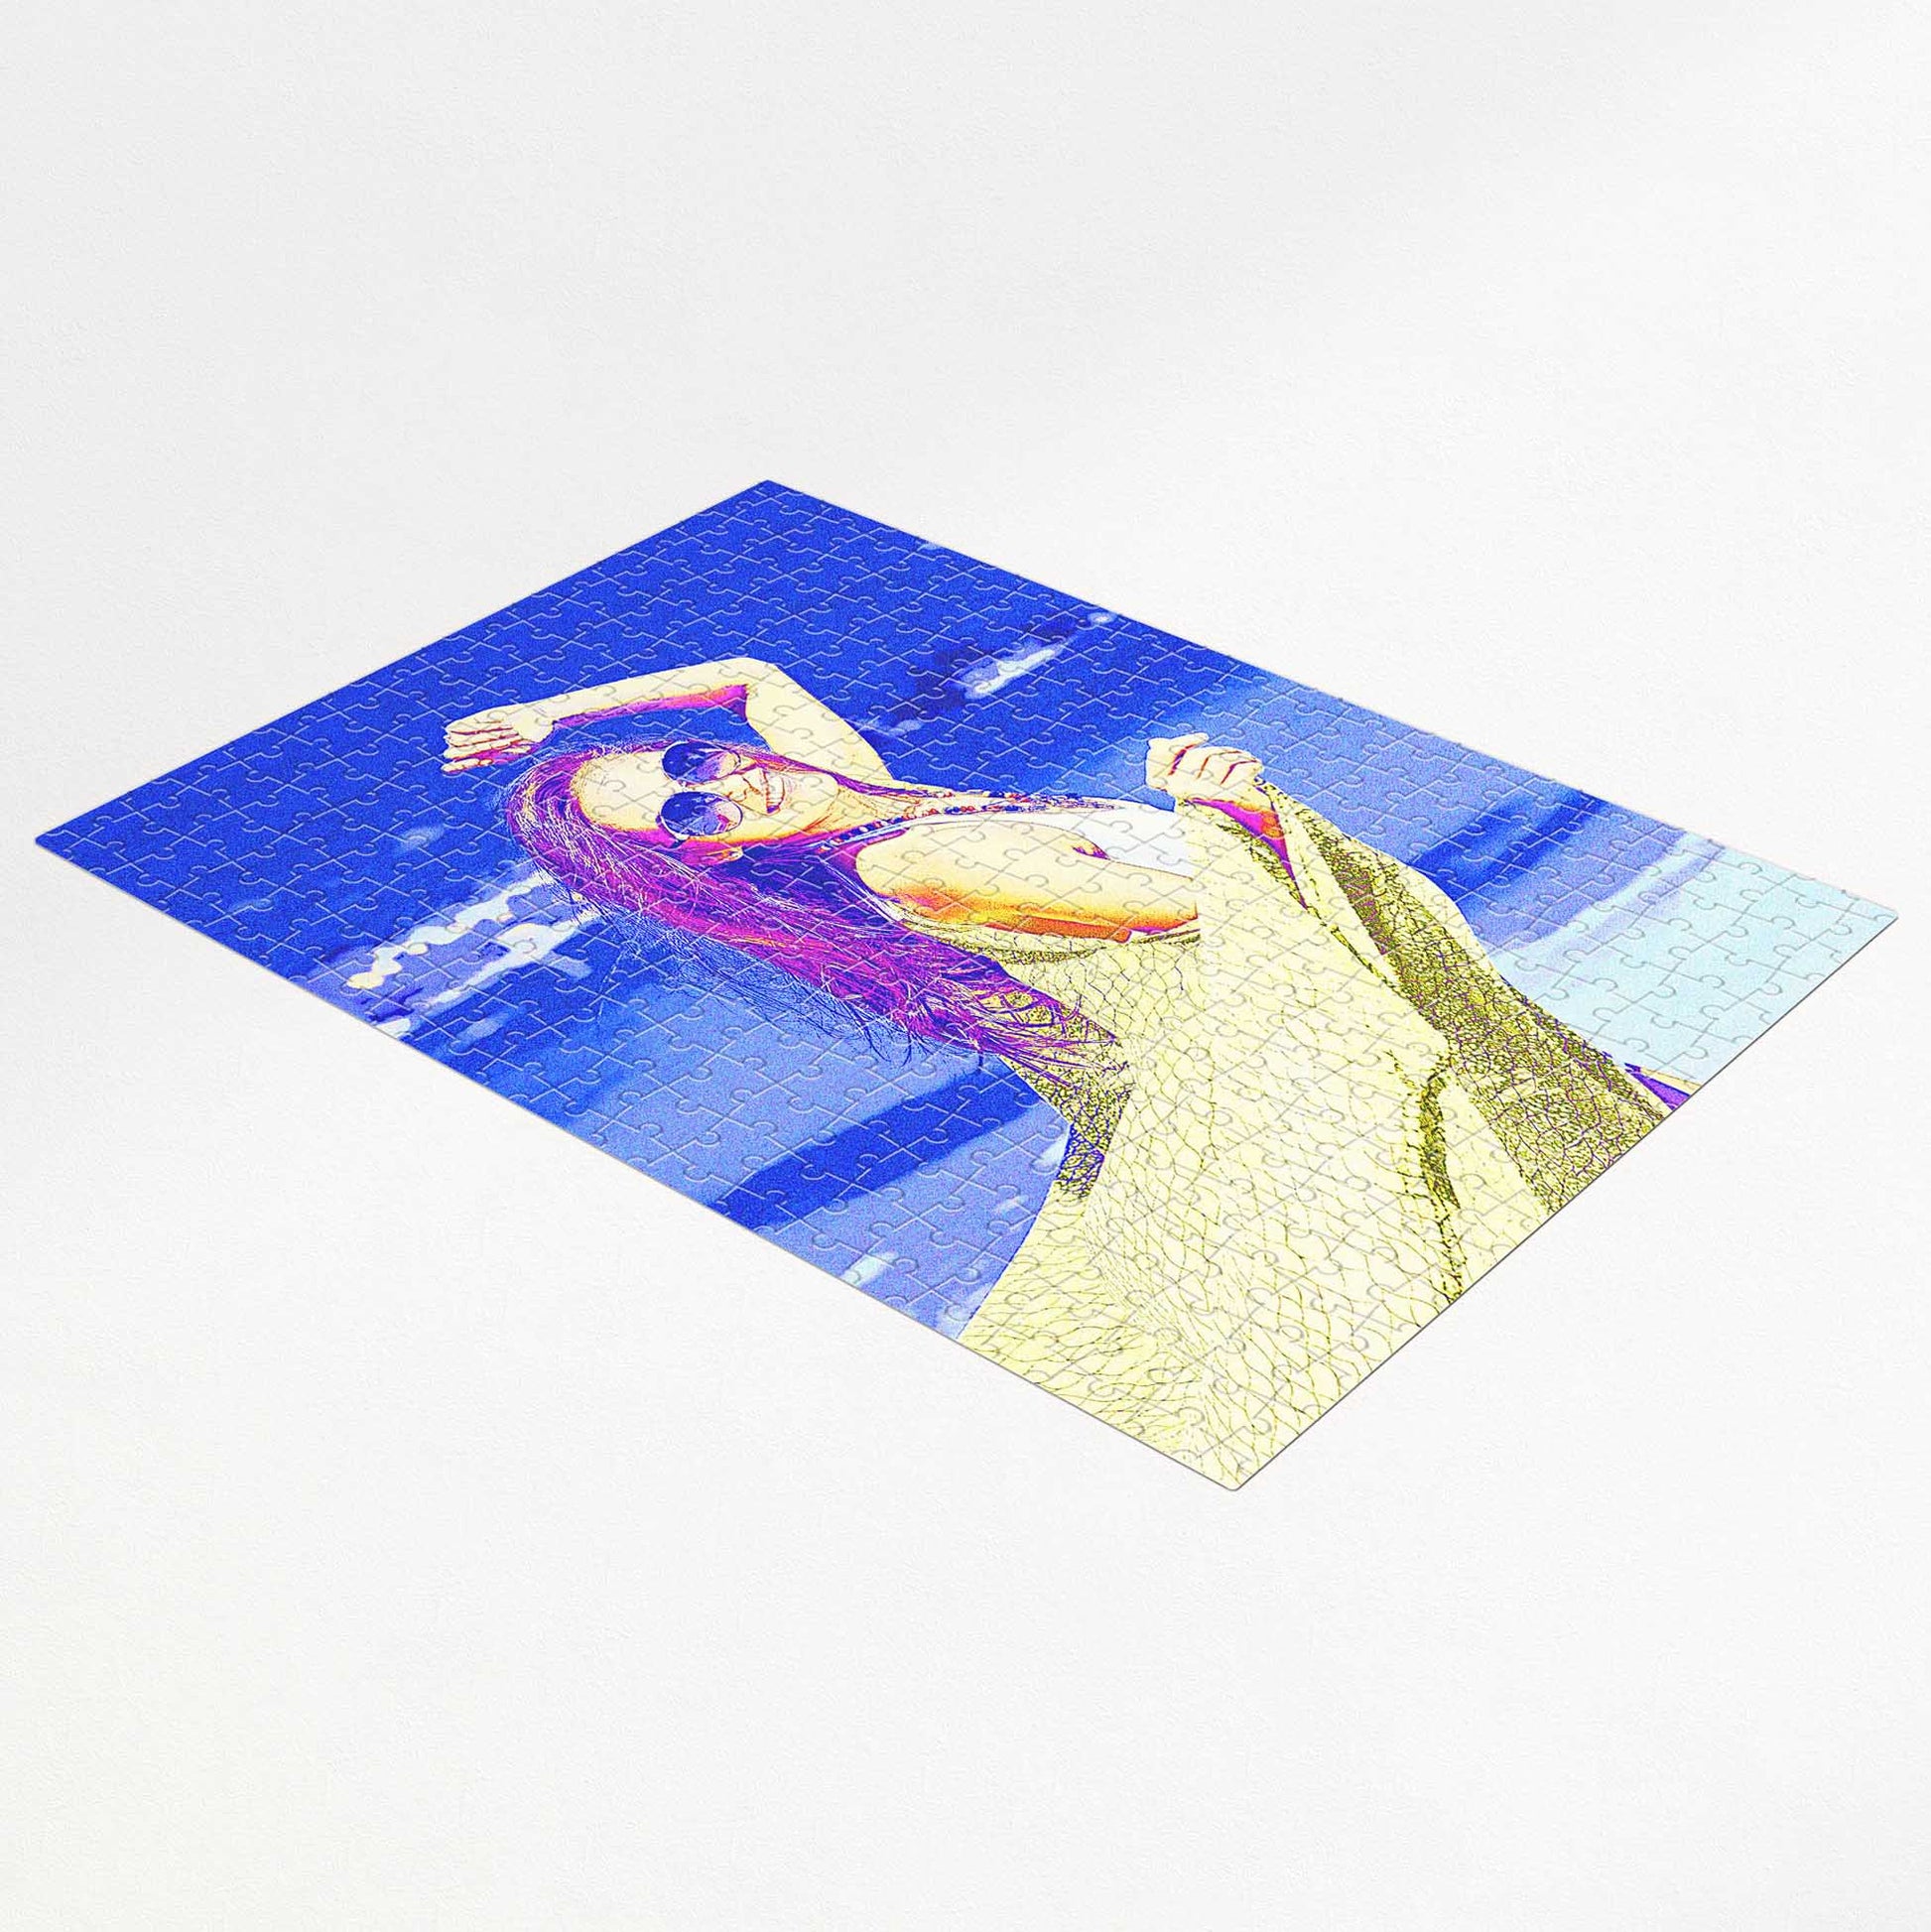 Searching for a thoughtful gift? Look no further! Our Blue & Purple Jigsaw Puzzle, printed from your photo, boasts a creative filter effect for an awe-inspiring result